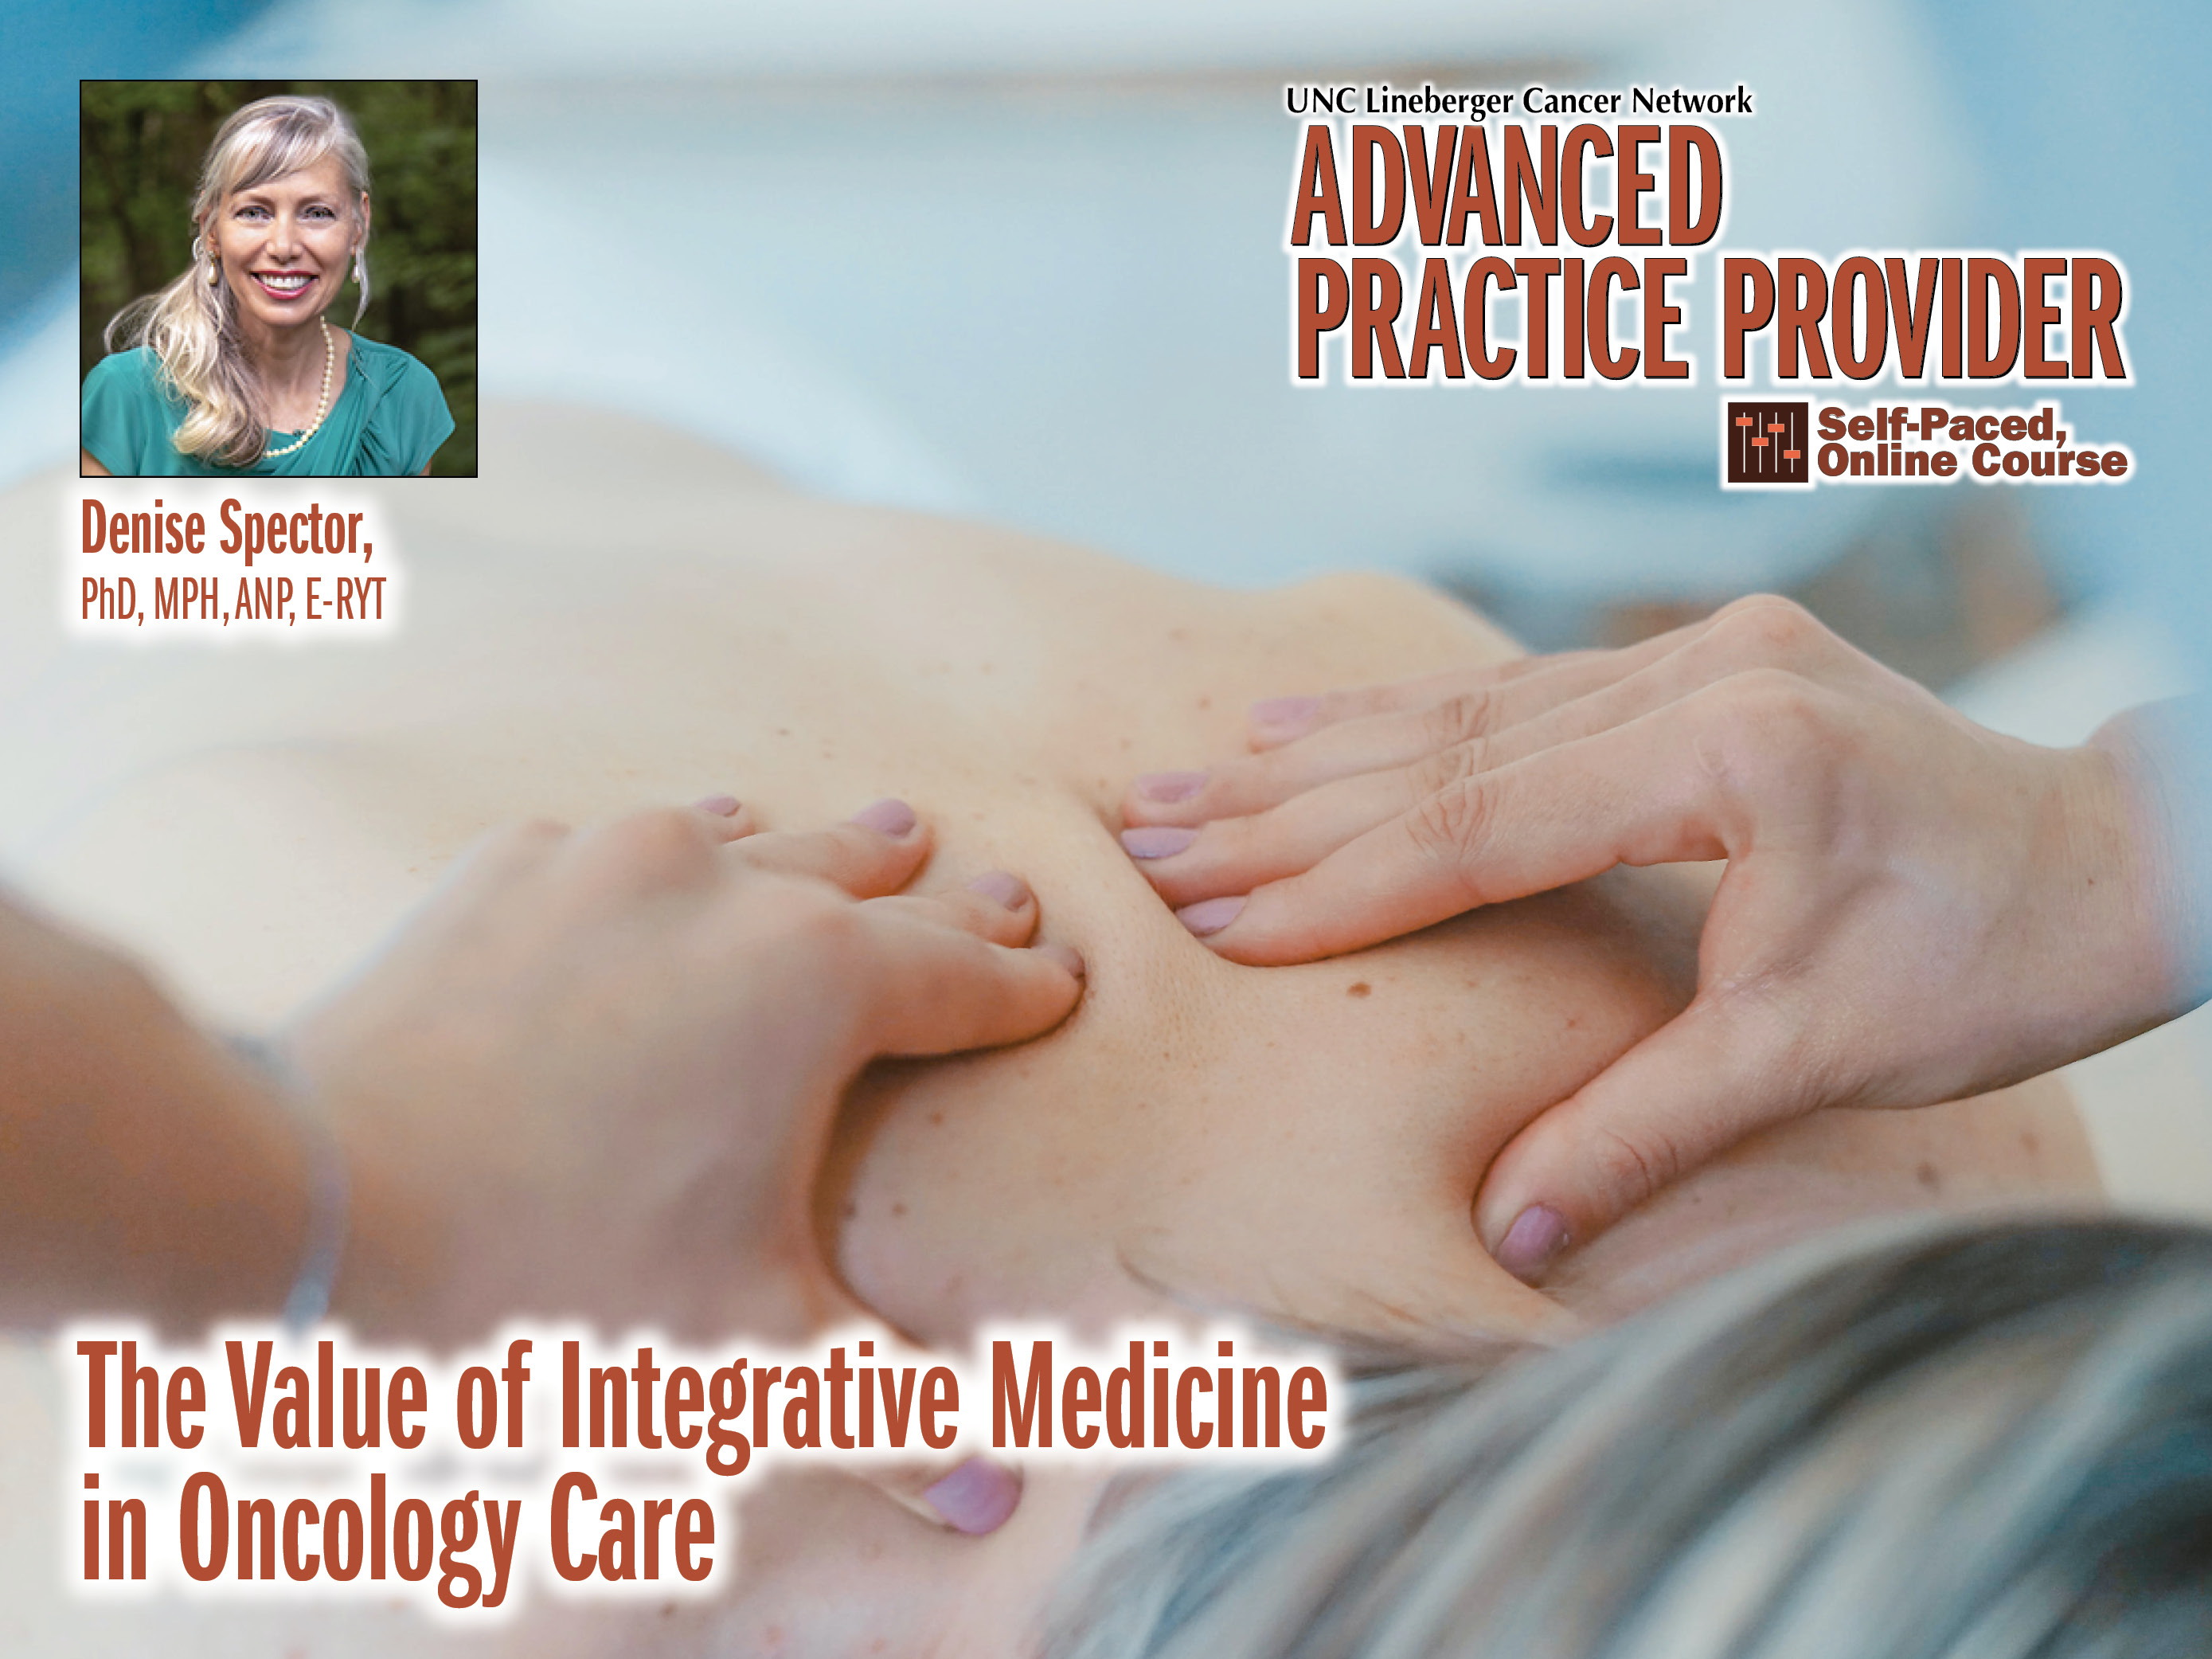 The Value of Integrative Medicine in Oncology Care